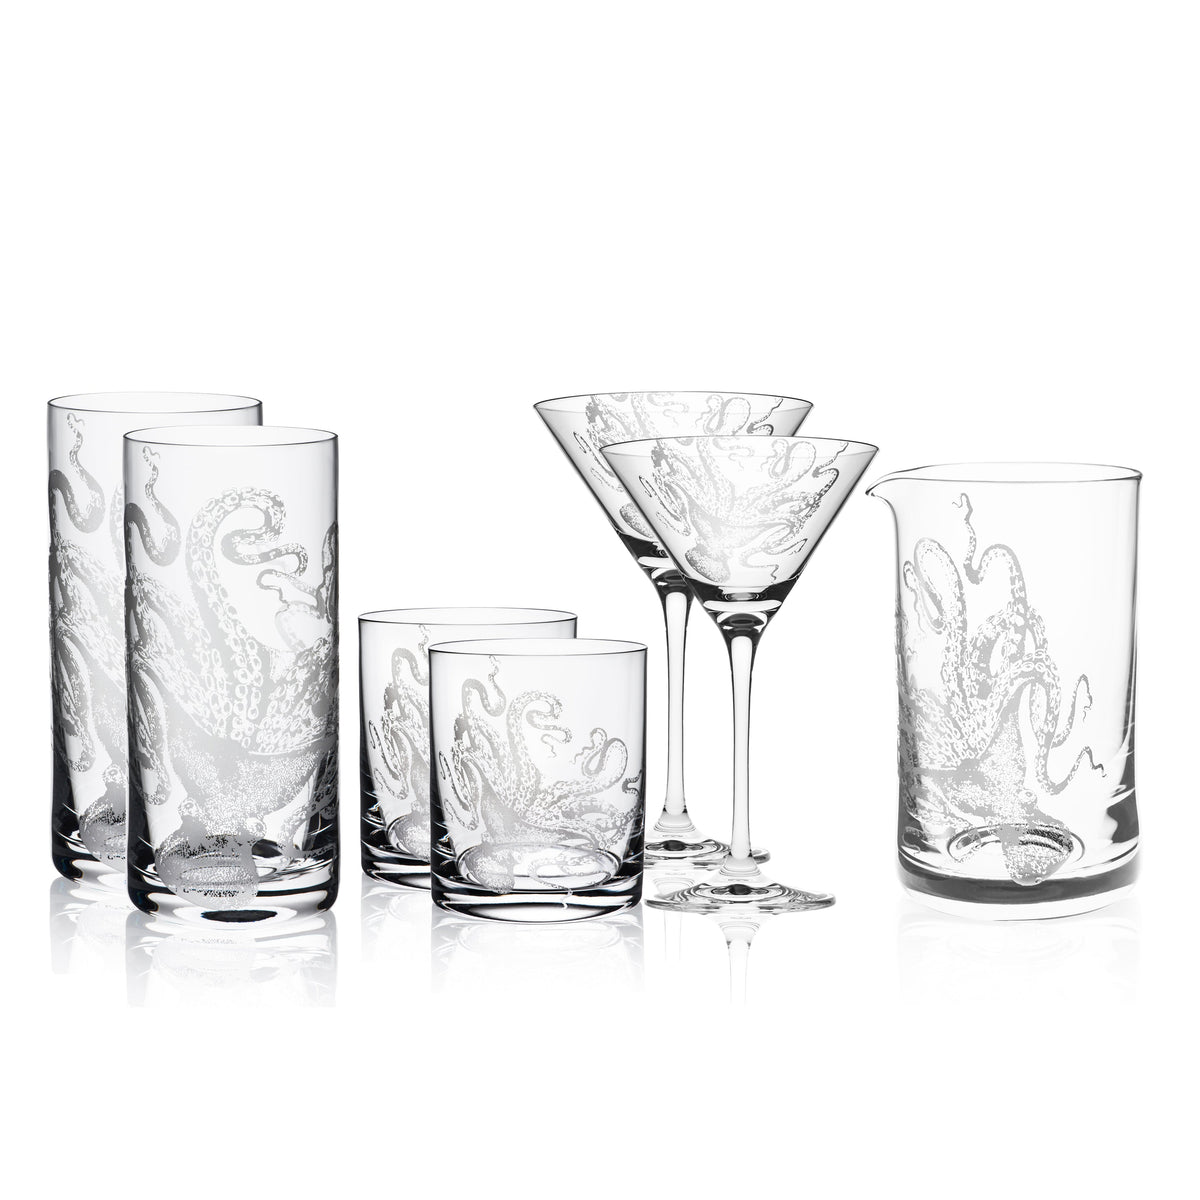 A set of Lucy Mixing Glasses with a Caskata Artisanal Home octopus design on them.